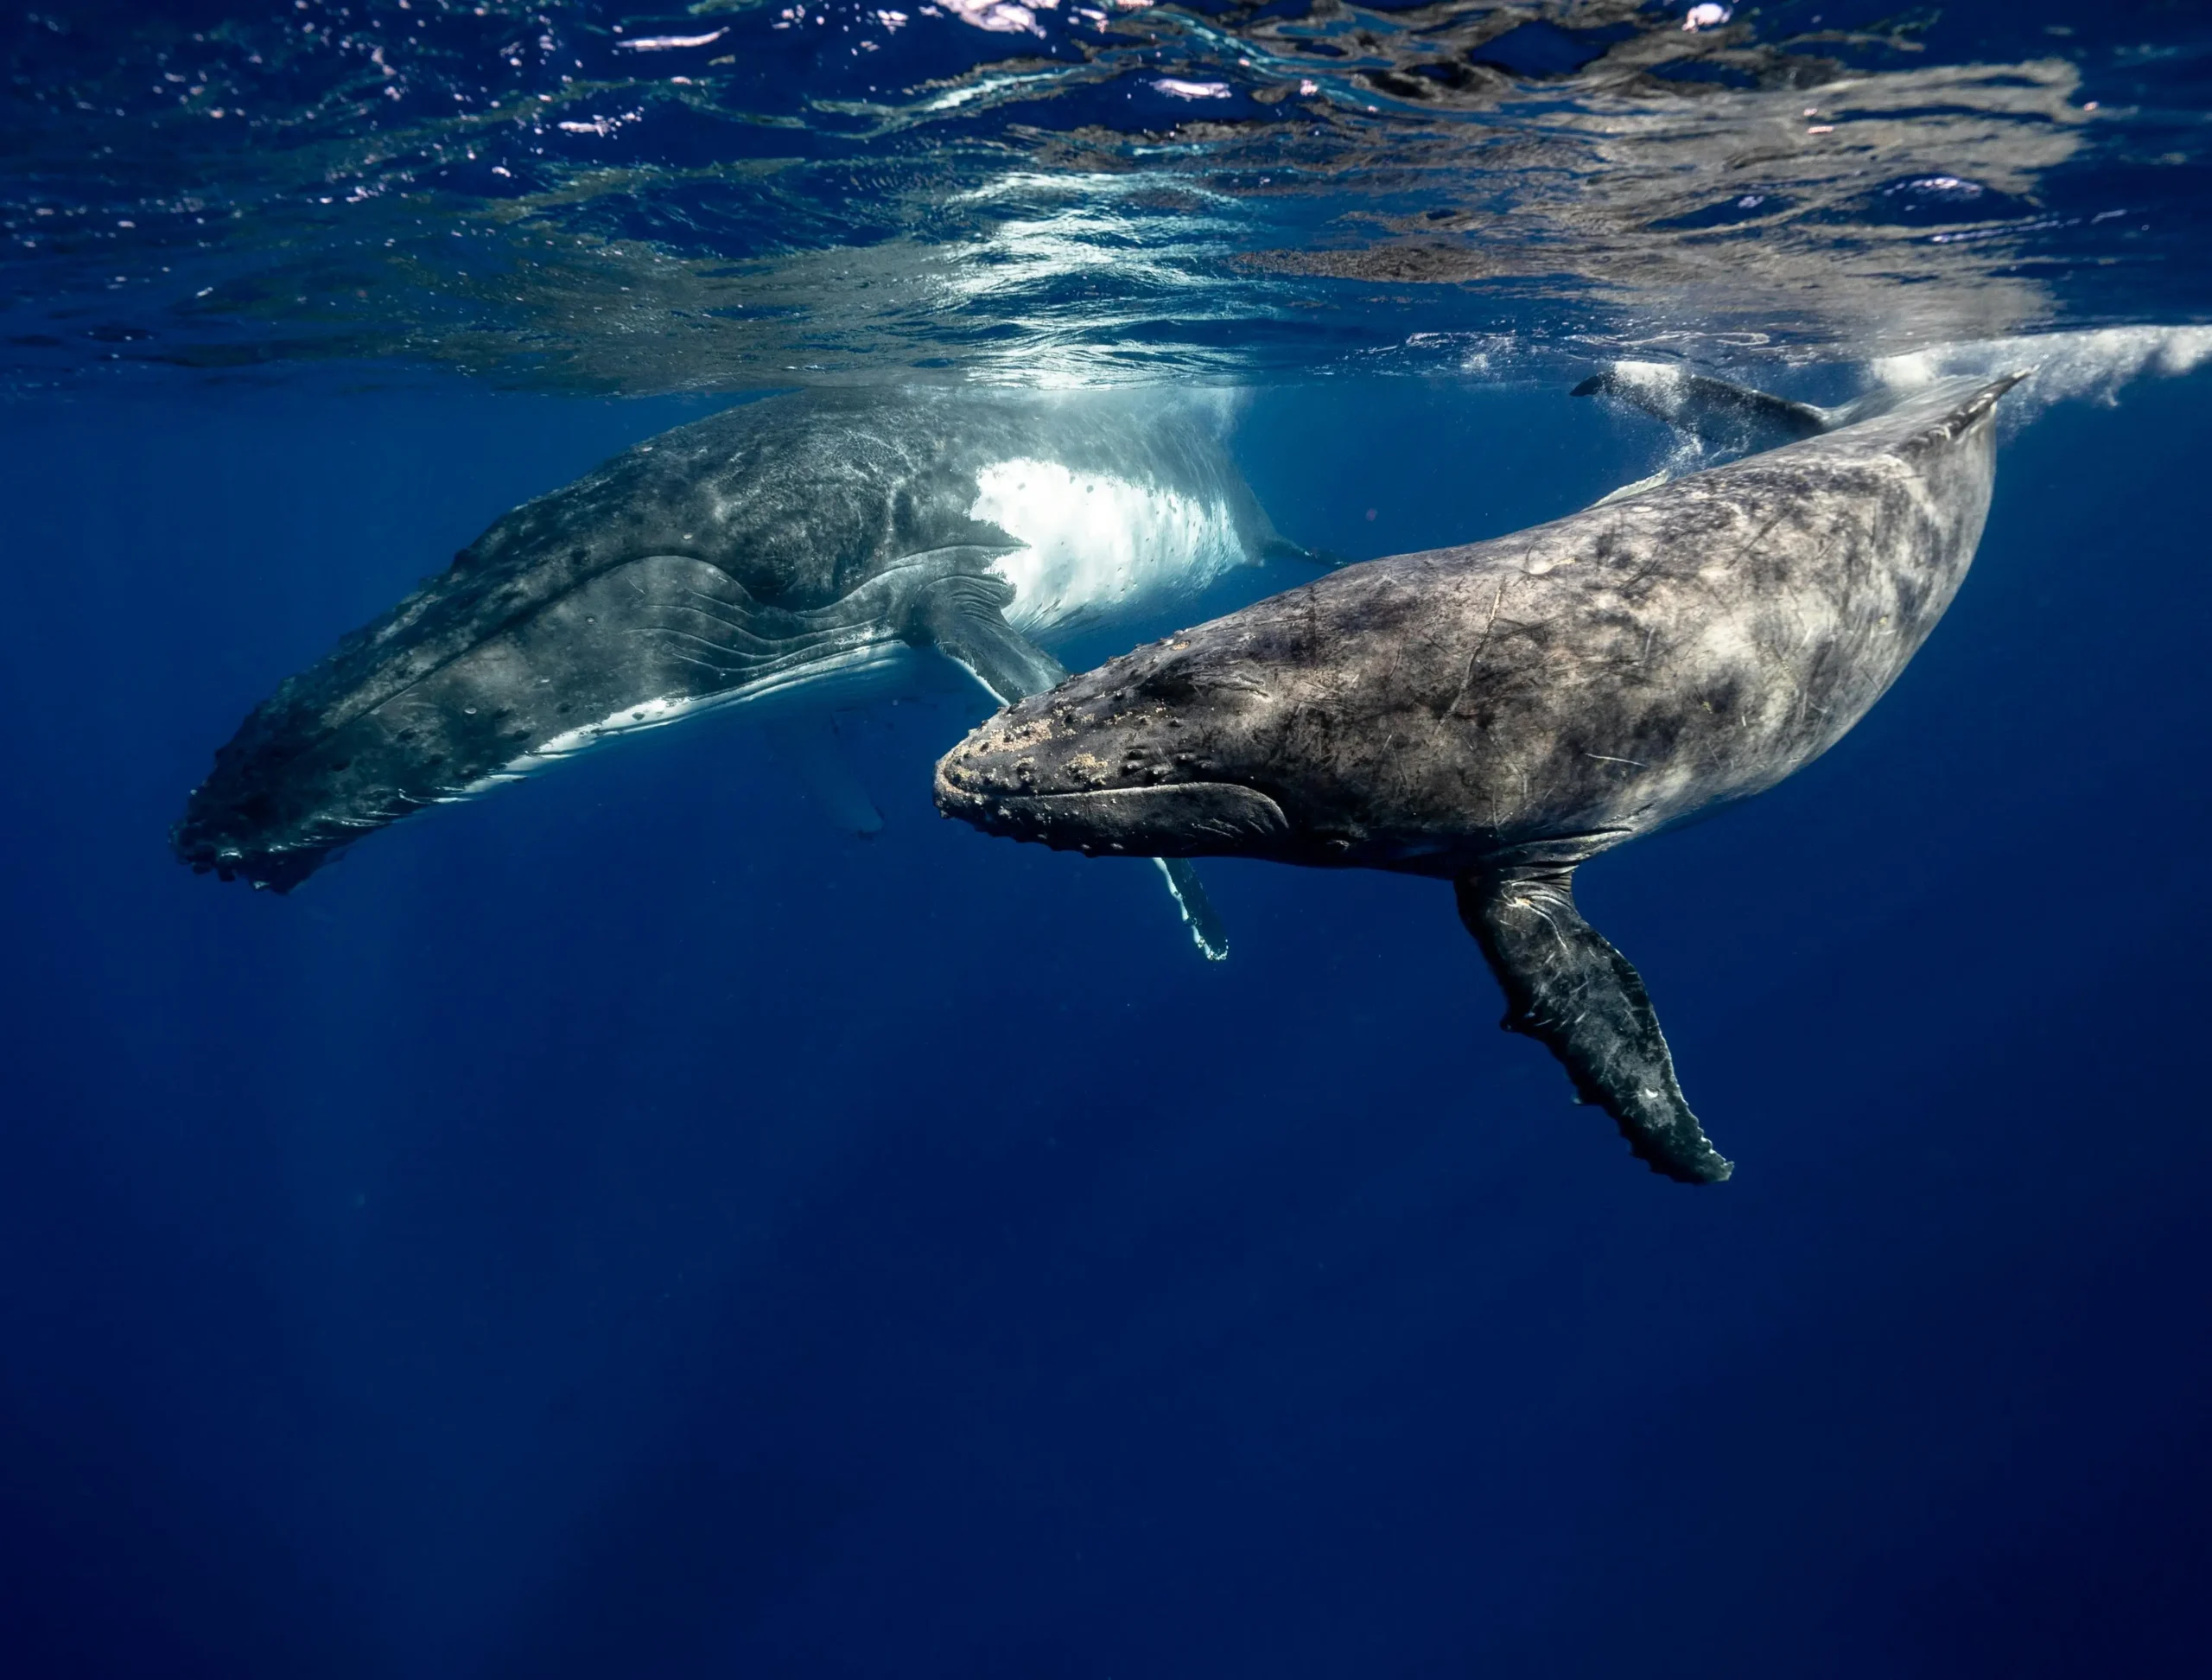 mother humpback whale and its calf swimming underwater in the ocean somewhere in Ecuador